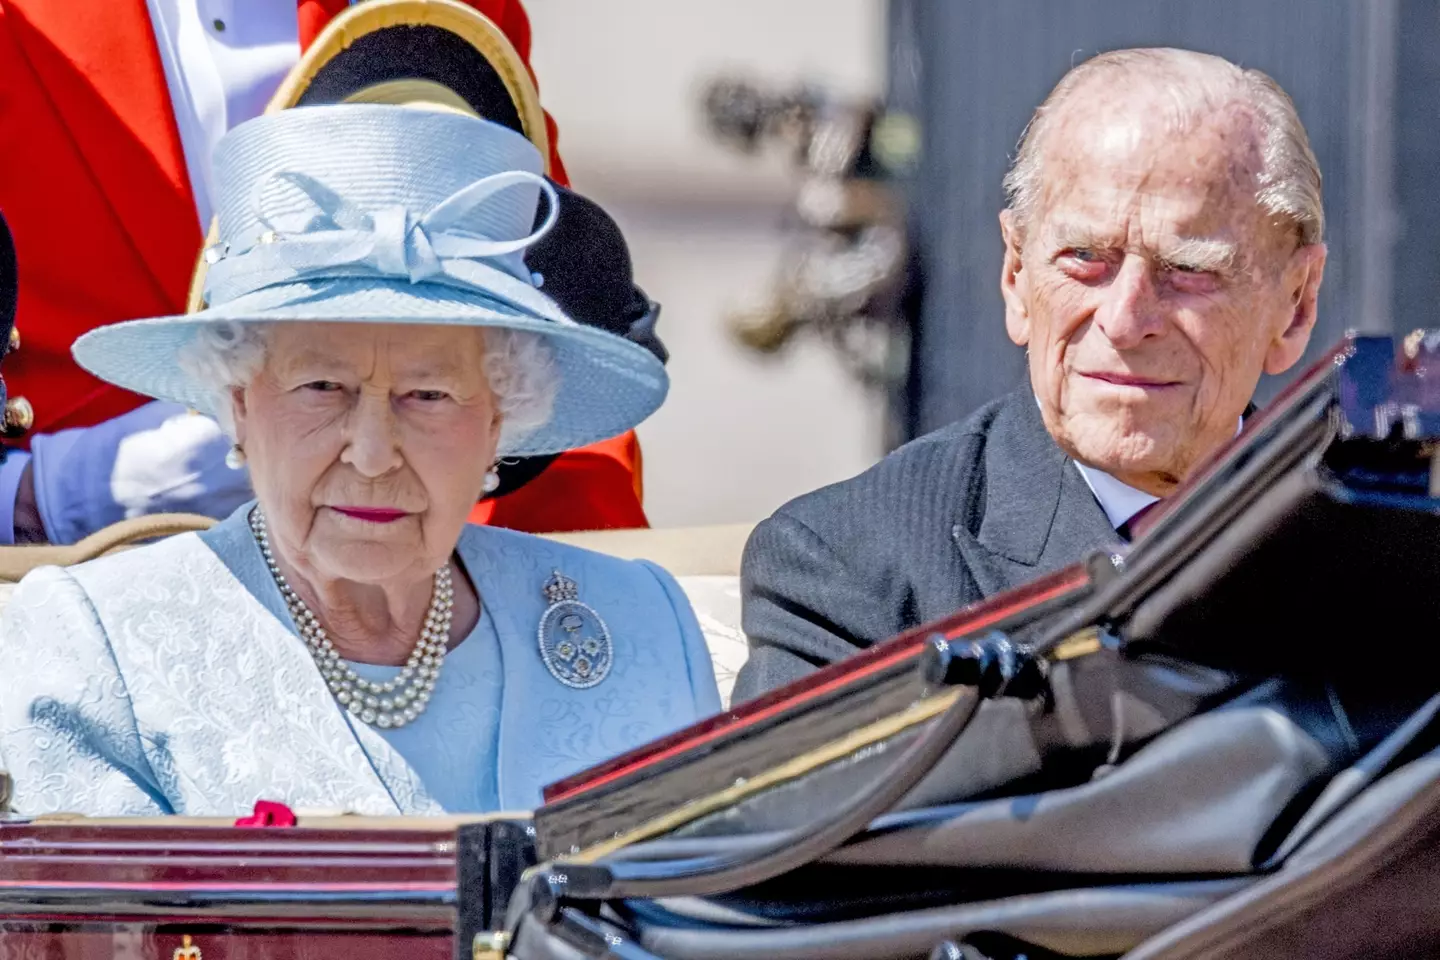 The Queen and the Duke of Edinburgh.